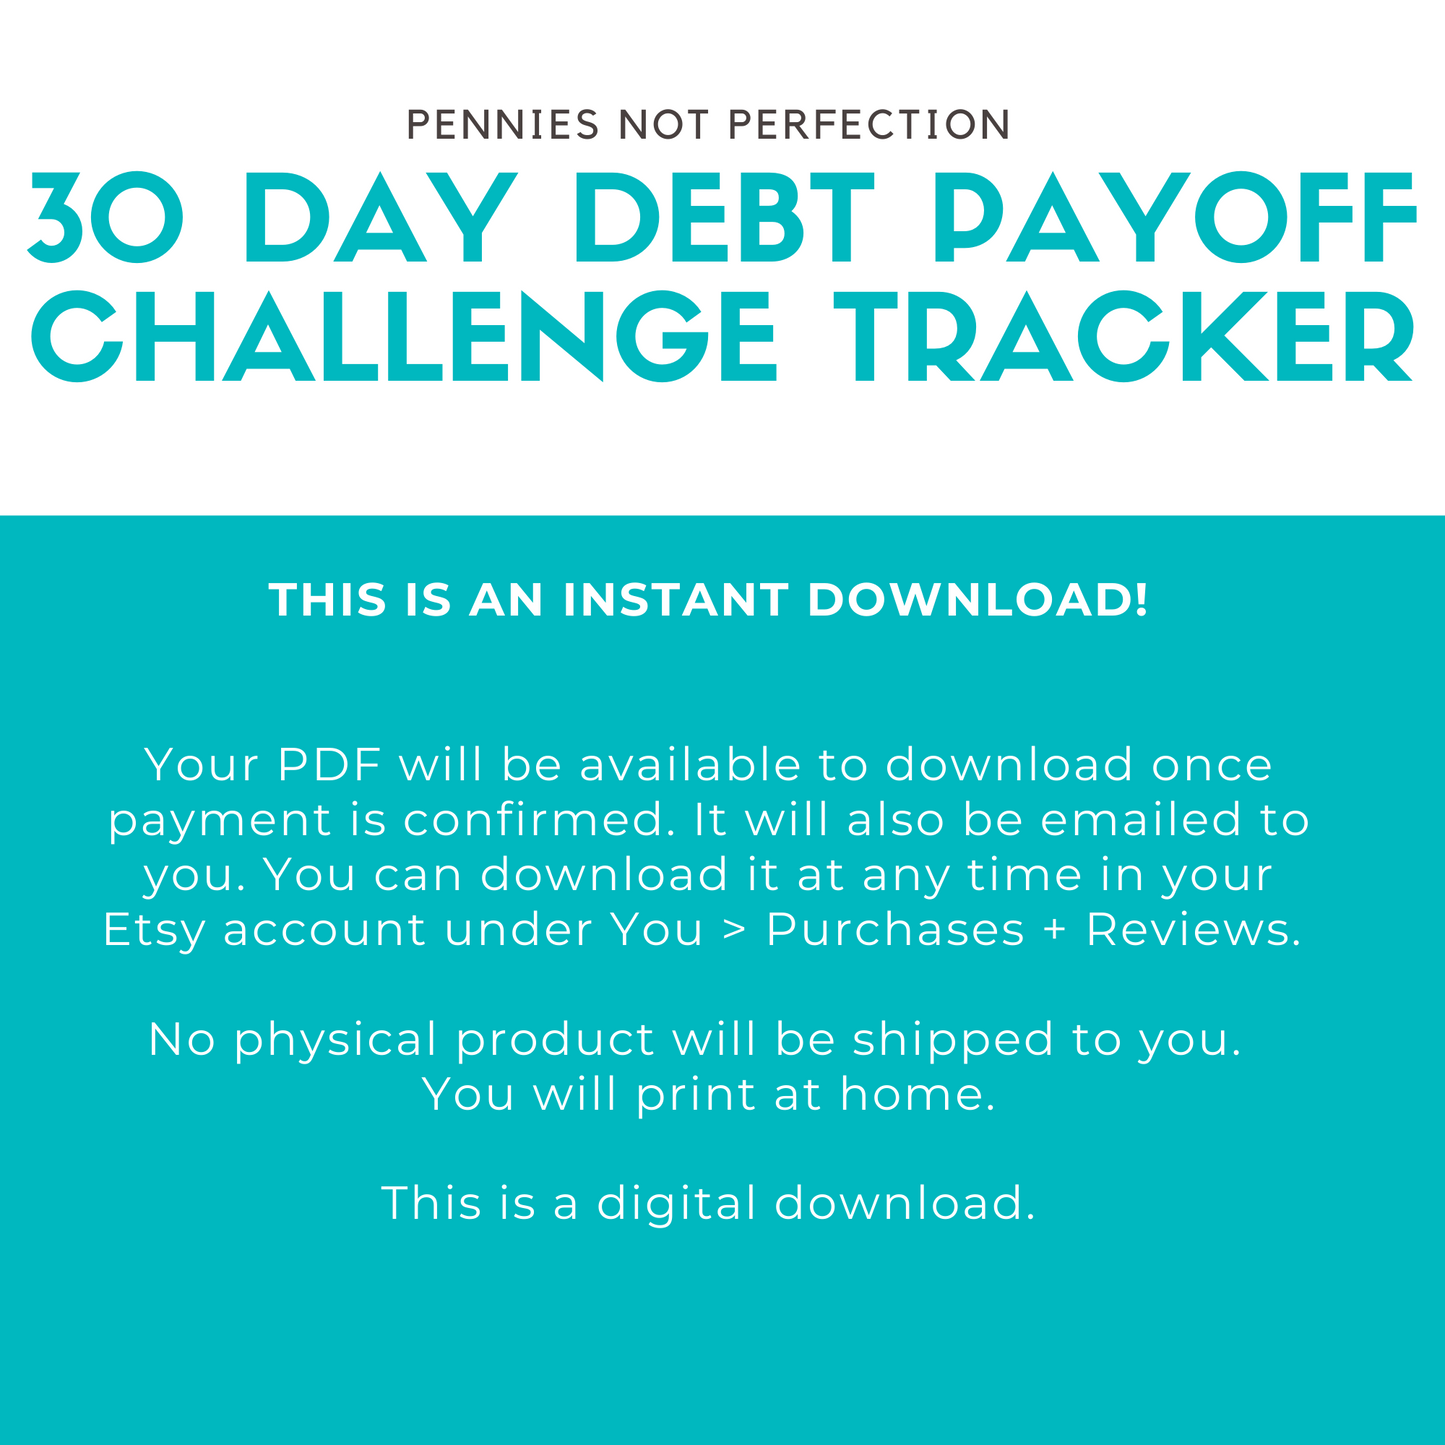 Debt Payoff Challenge Tracker Printable | Pay Off $1,000 In 30 Days